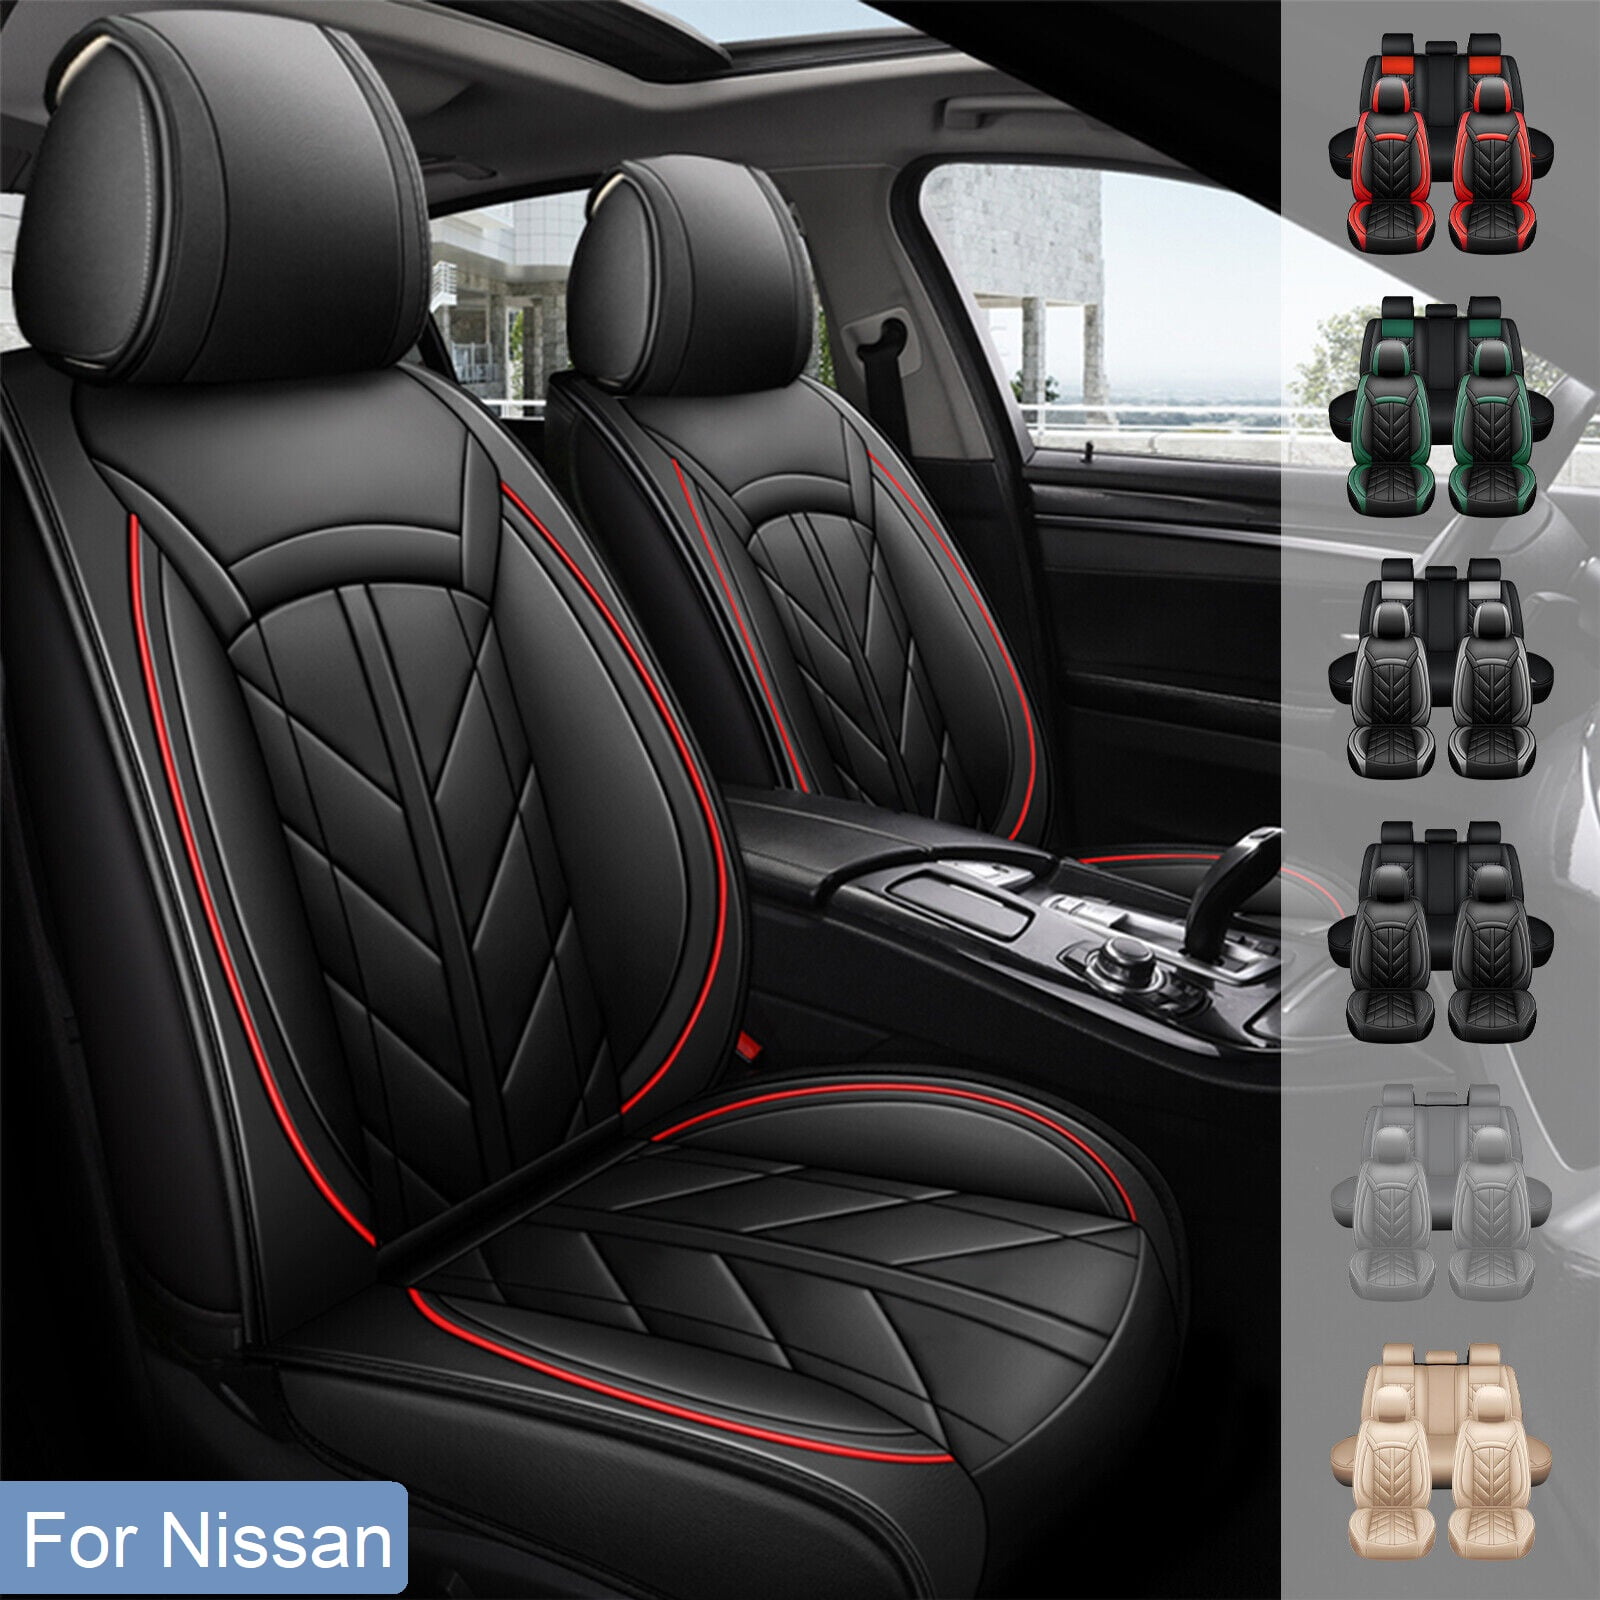 For Nissan Car Seat Covers 5-Seats Full Set, Wear-resistant Pu